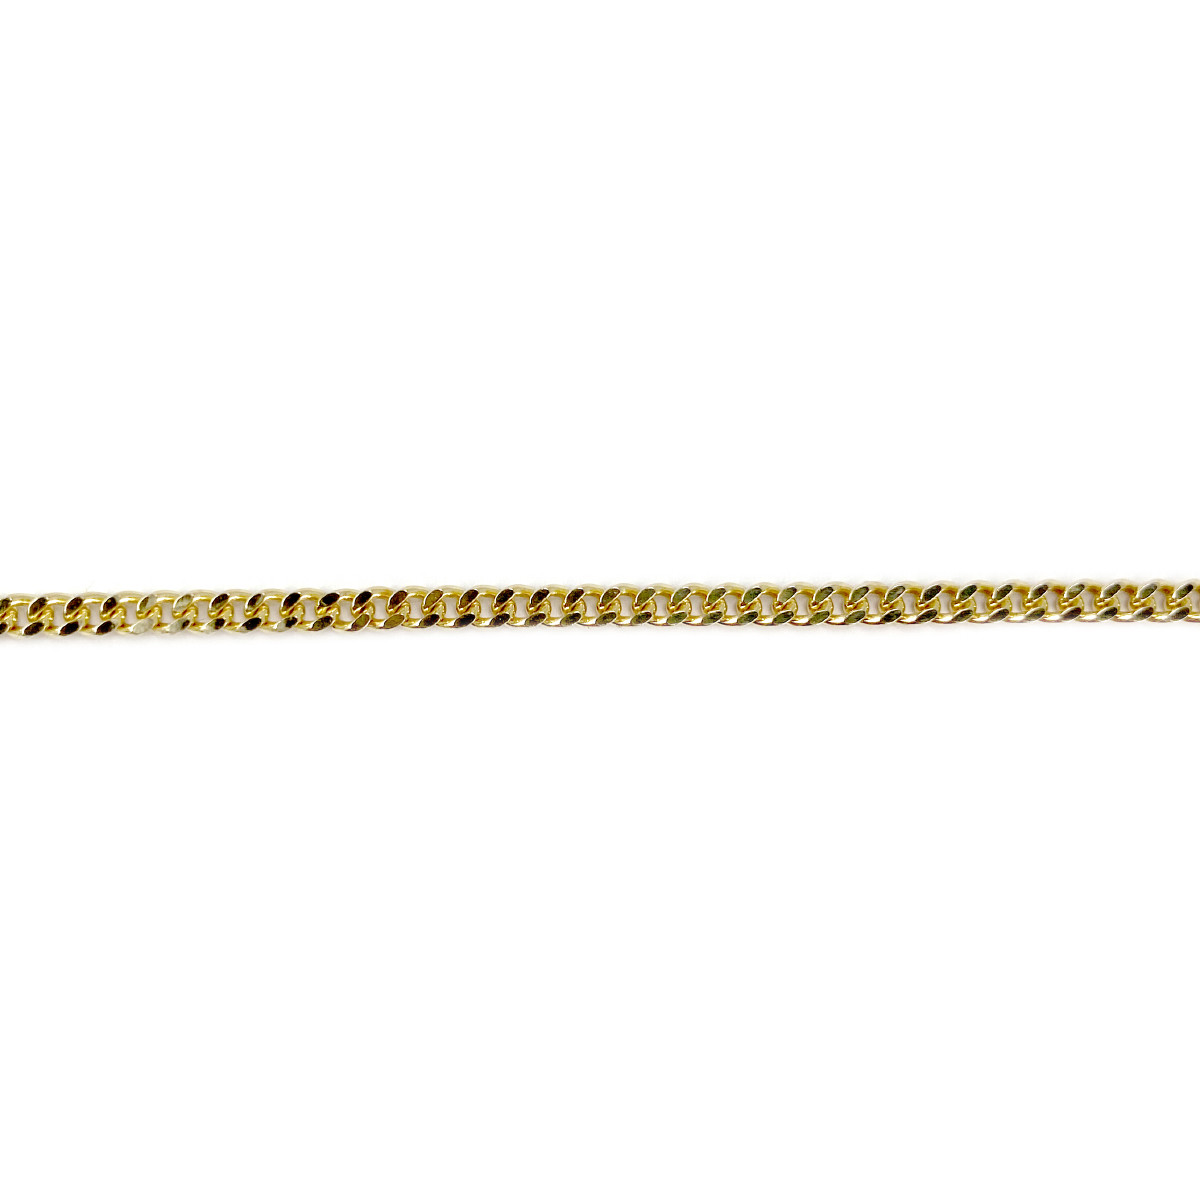 Chaine d'occasion or 375 jaune maille gourmette 45 cm - vue 3